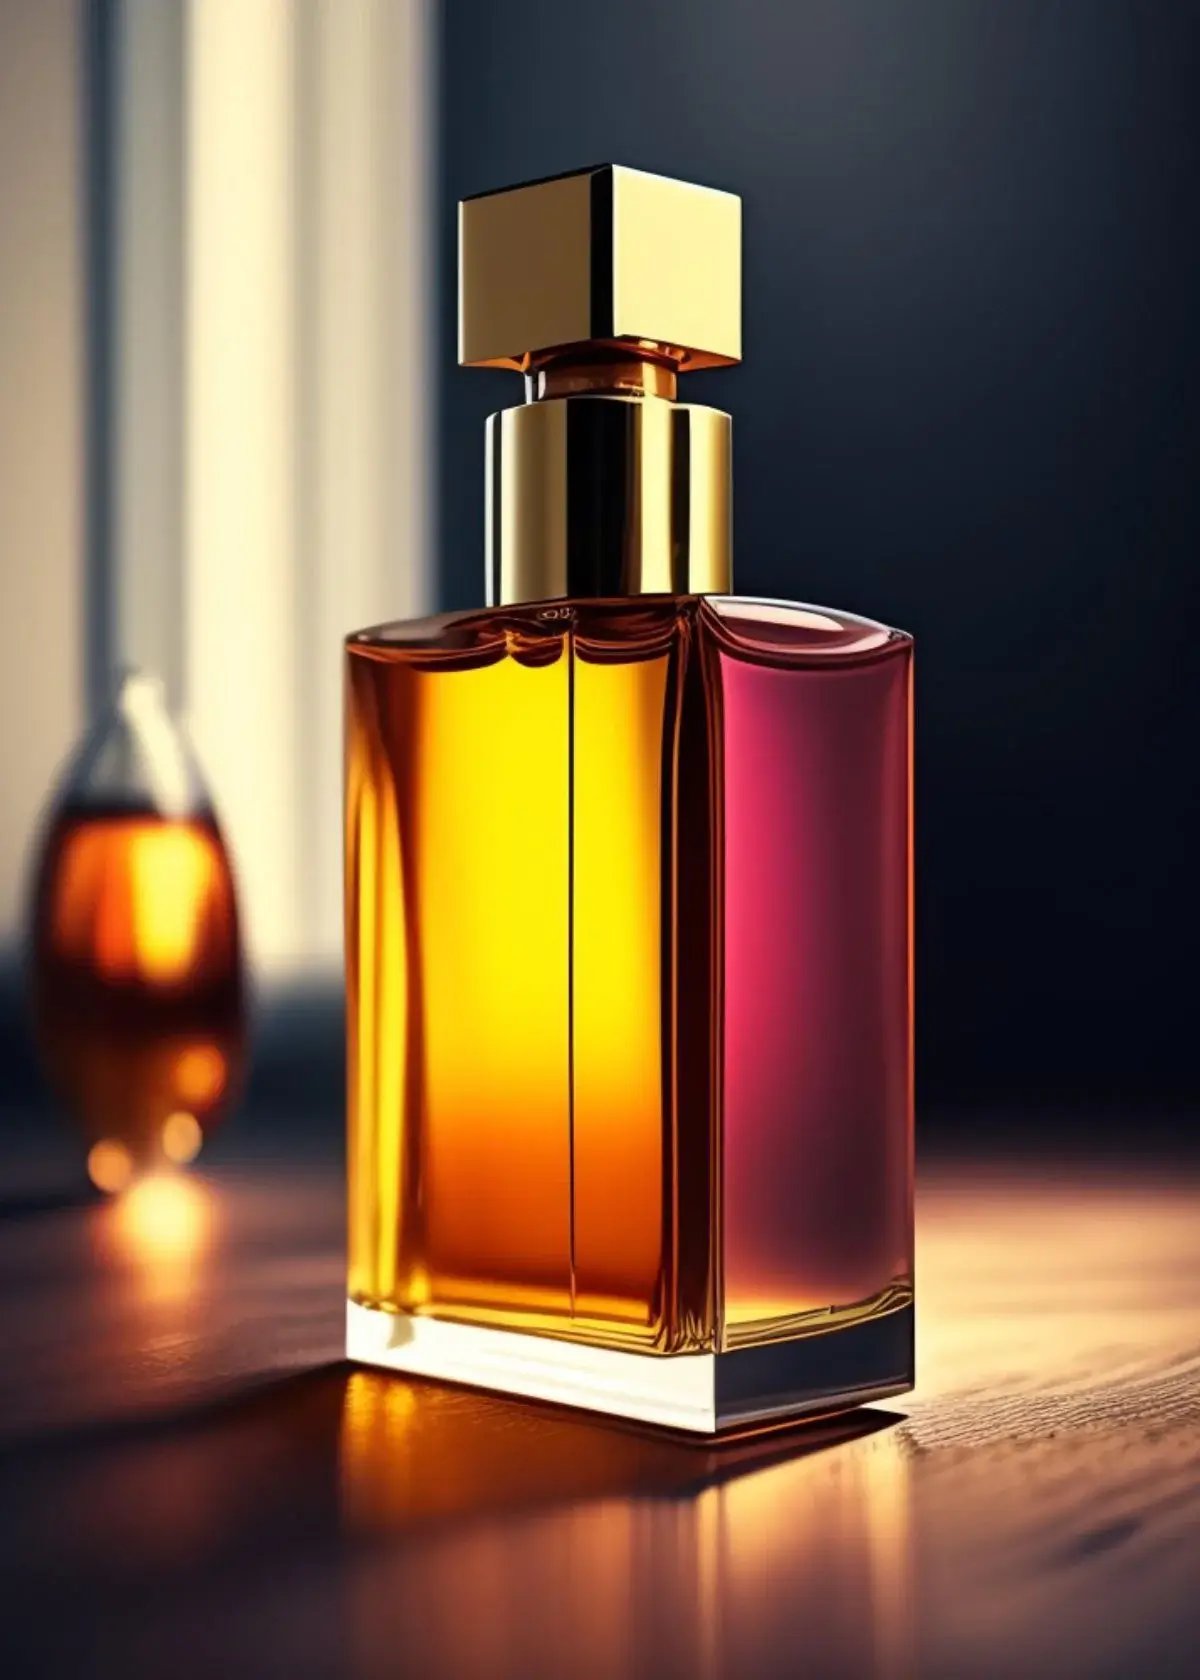 What is oud and where does it come from?